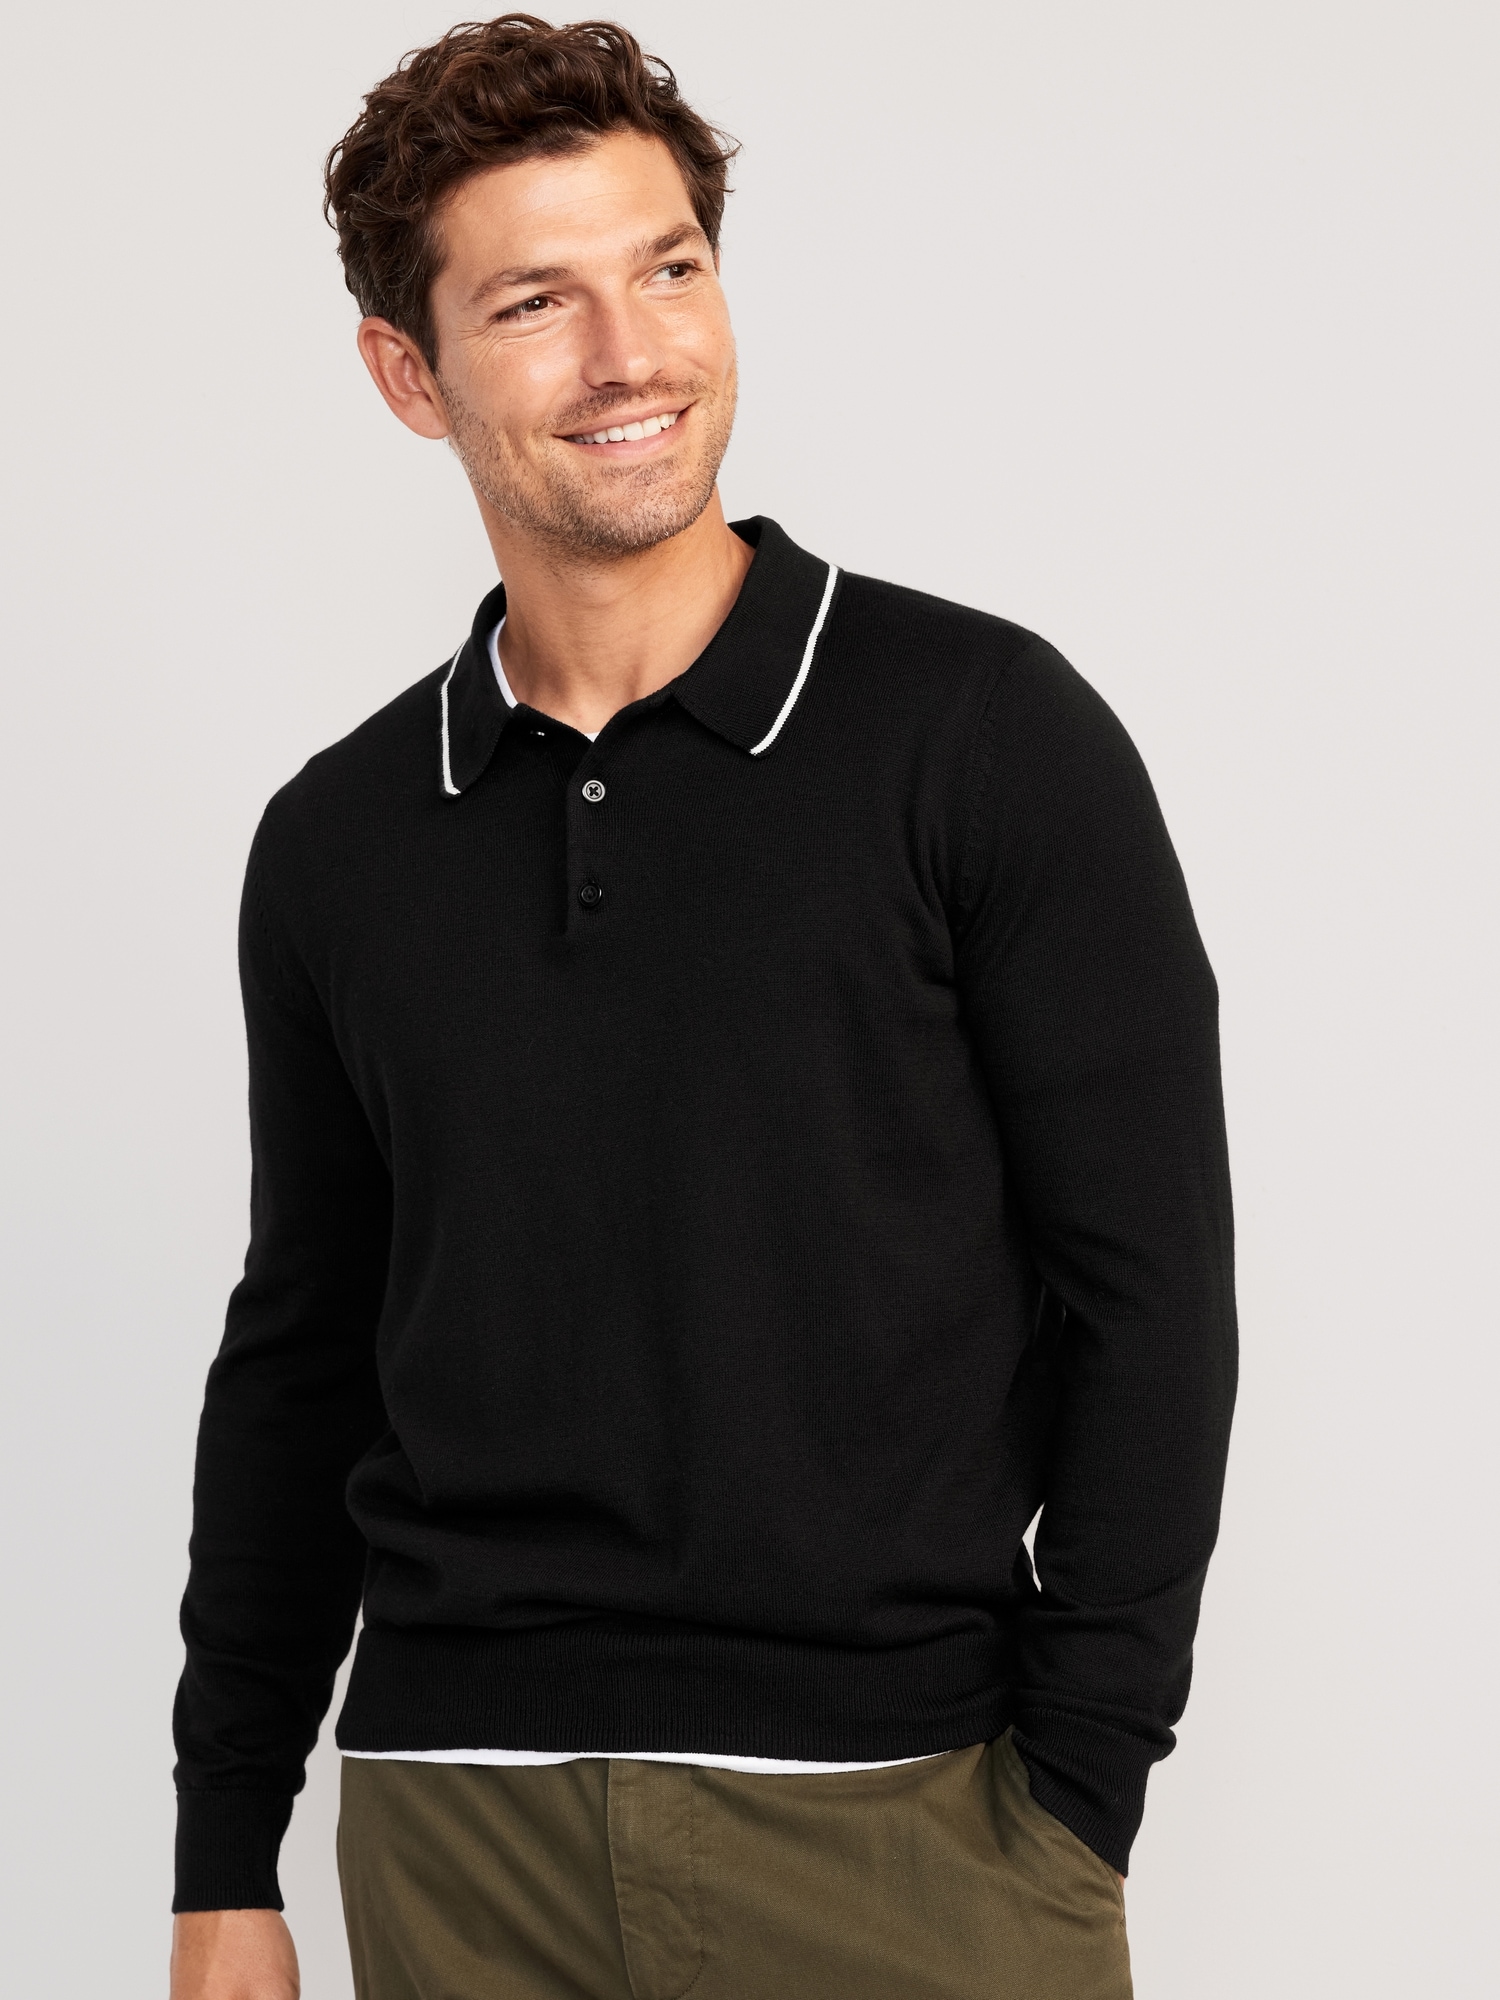 Long-Sleeve Polo Pullover Sweater for Men | Old Navy